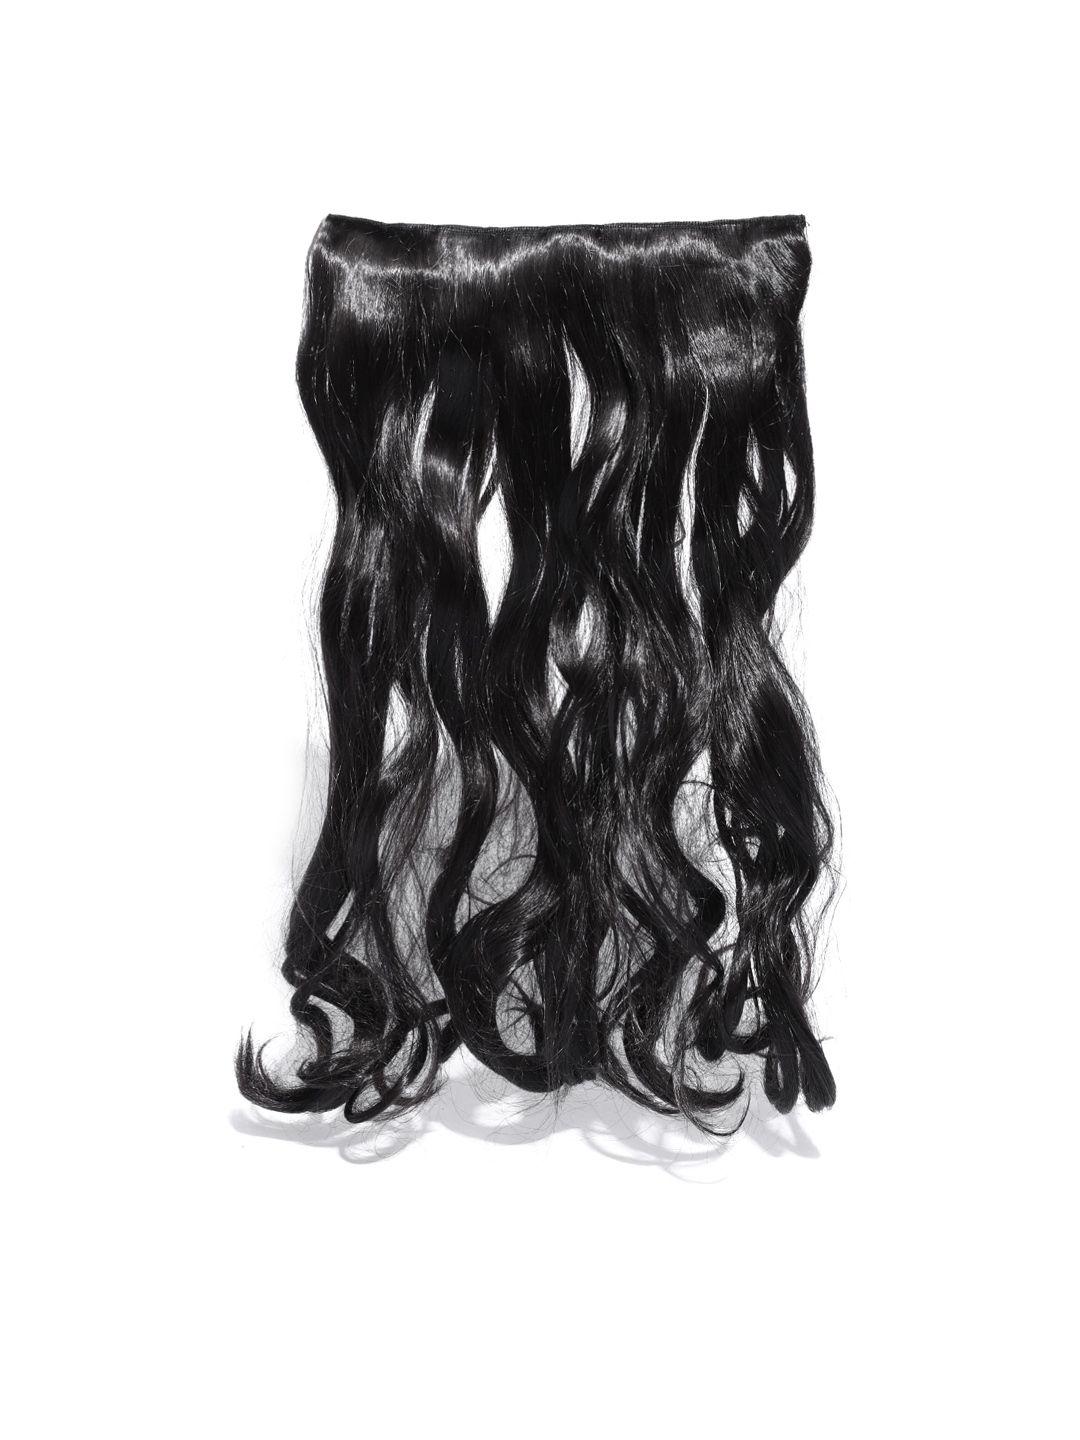 chronex curly wavy fibre clip-on synthetic hair extensions - black